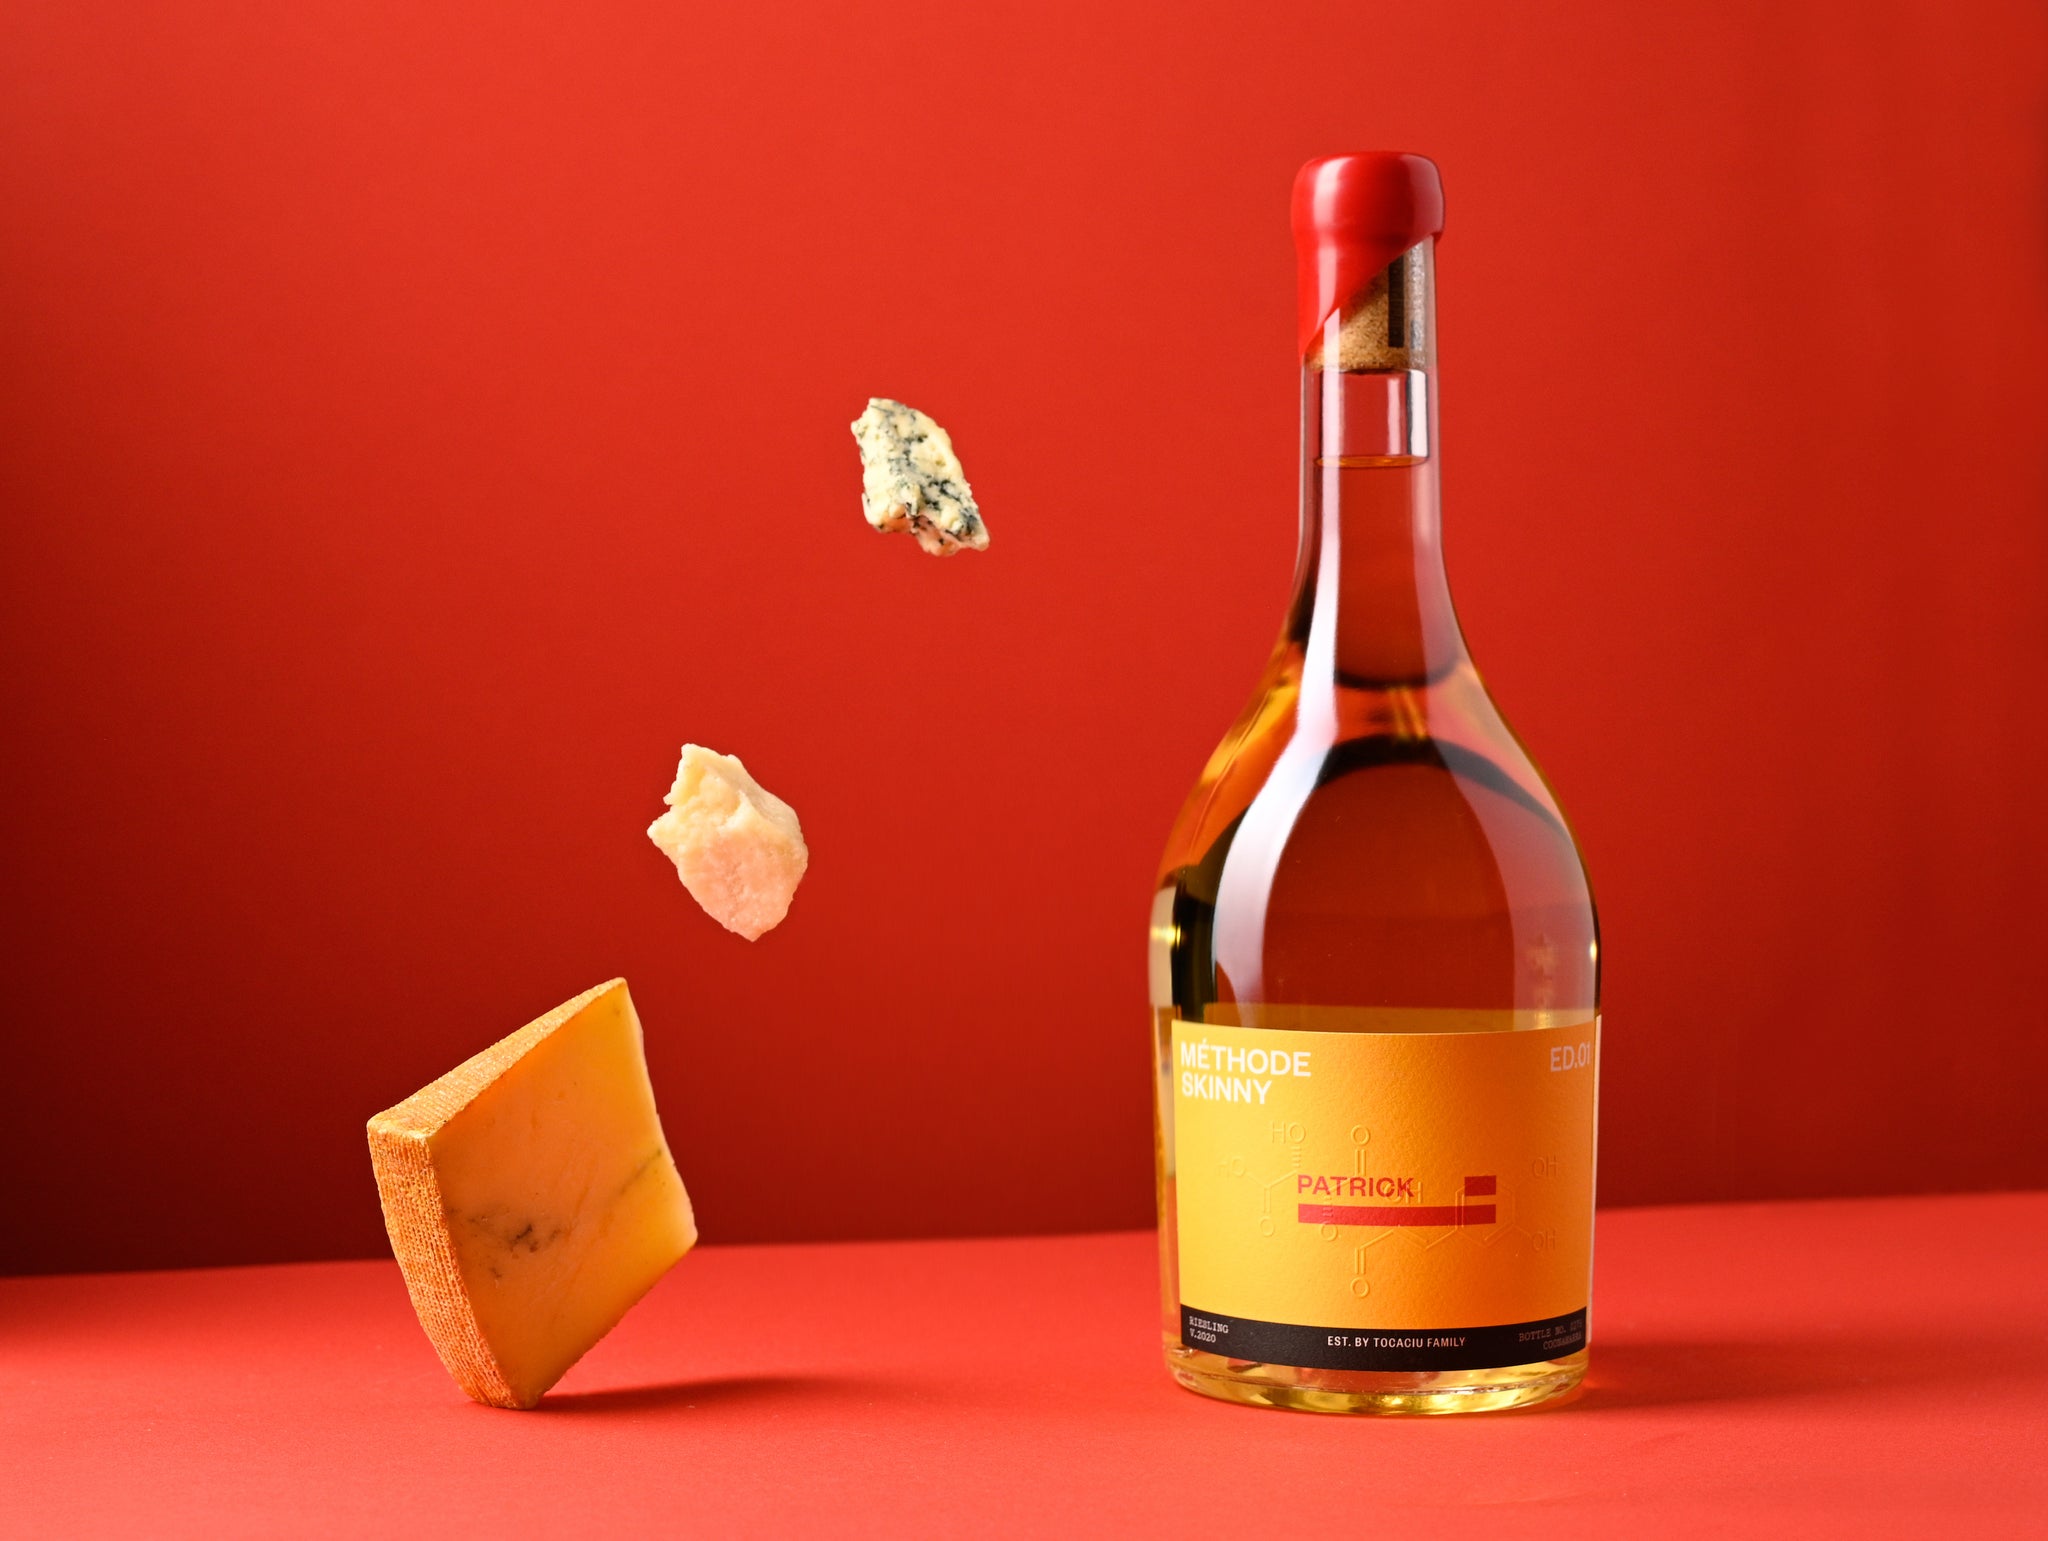 A bottle of white wine with a yellow label against a bright red background, next to 3 falling chunks of cheese.